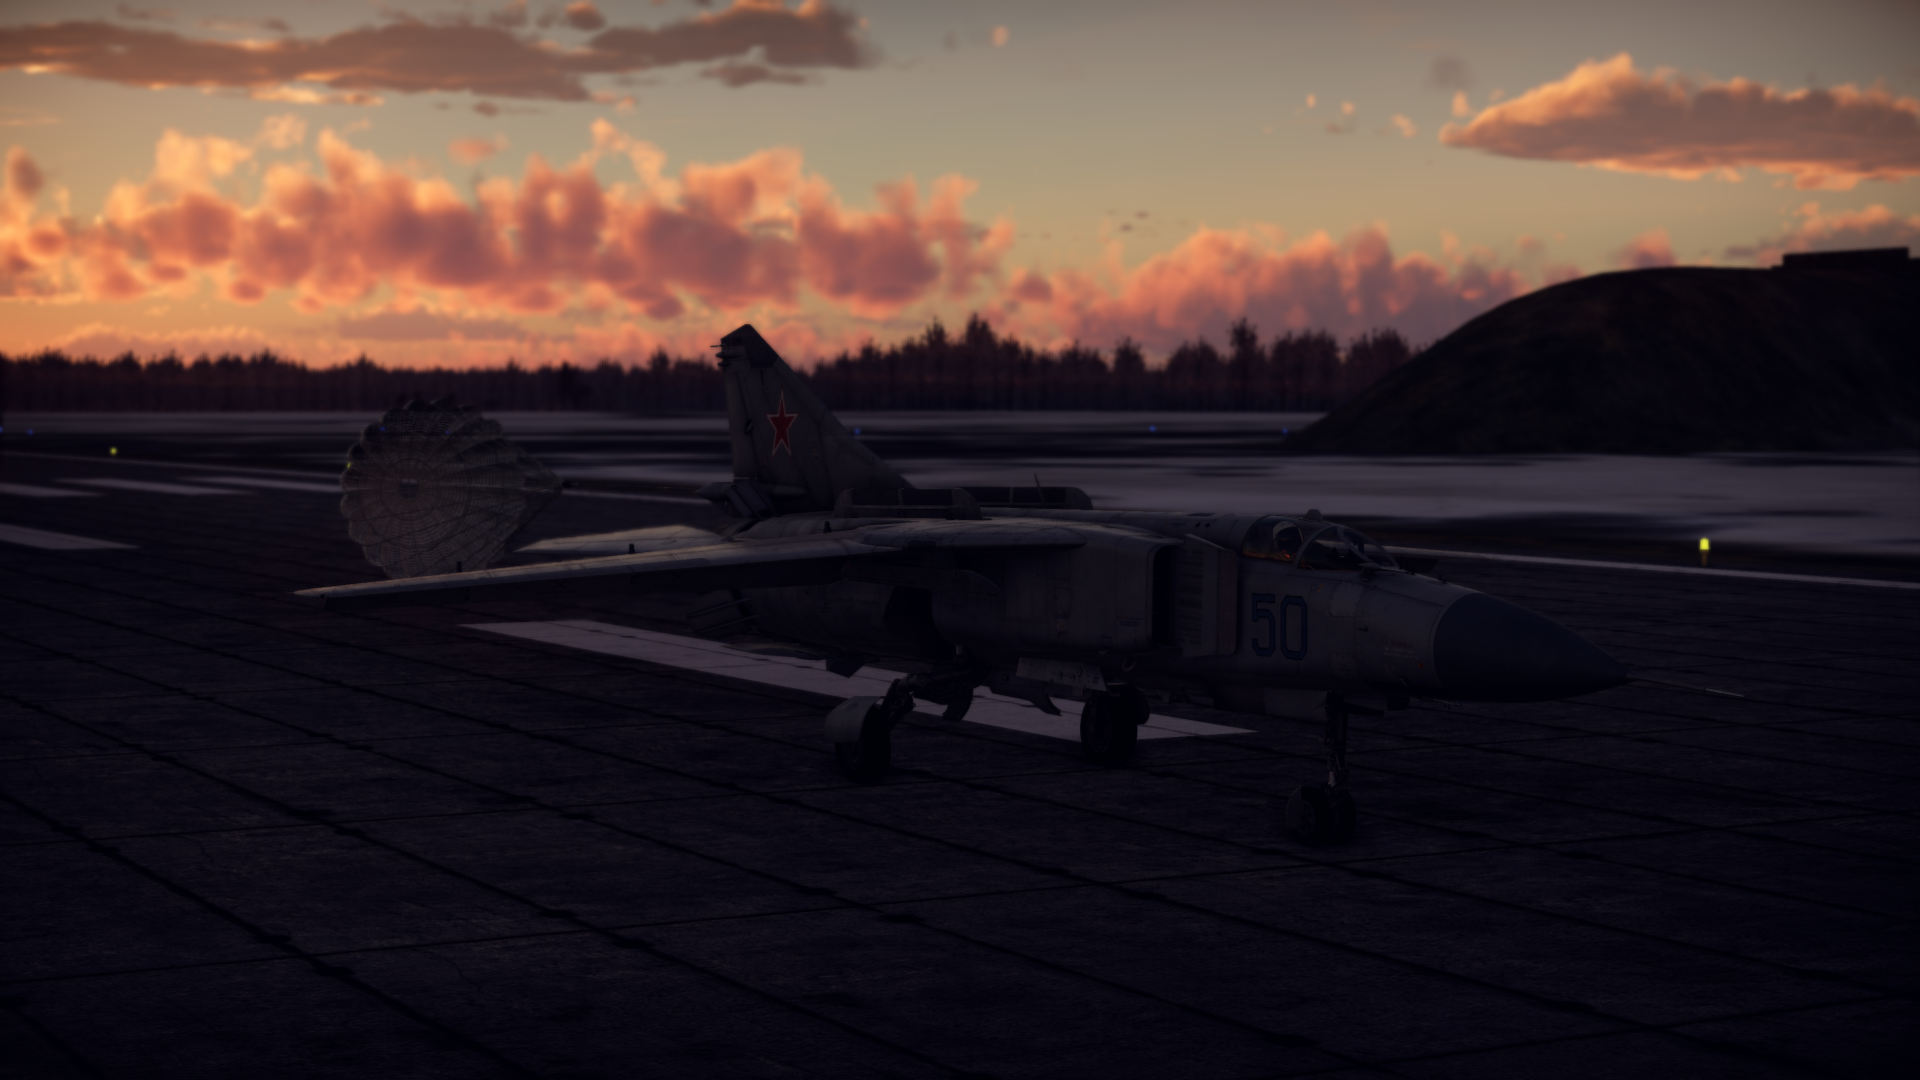 MiG 23ML Jet Fighter Airplane War Thunder Sunset Sunset Glow Clouds Sky Aircraft Video Games CGi 1920x1080